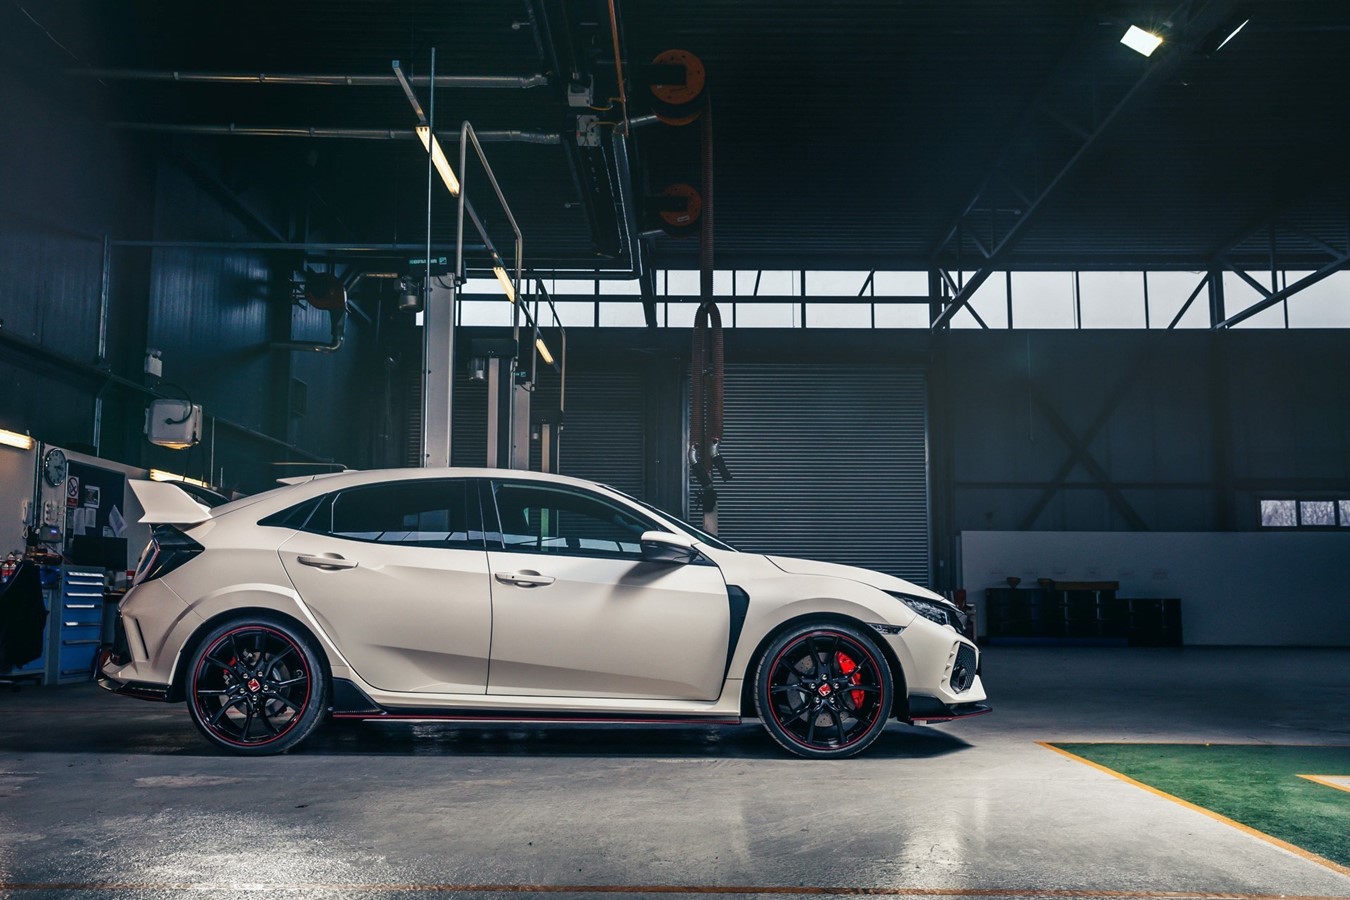 New Civic Type R wins Best Hot Hatch at Auto Express Awards